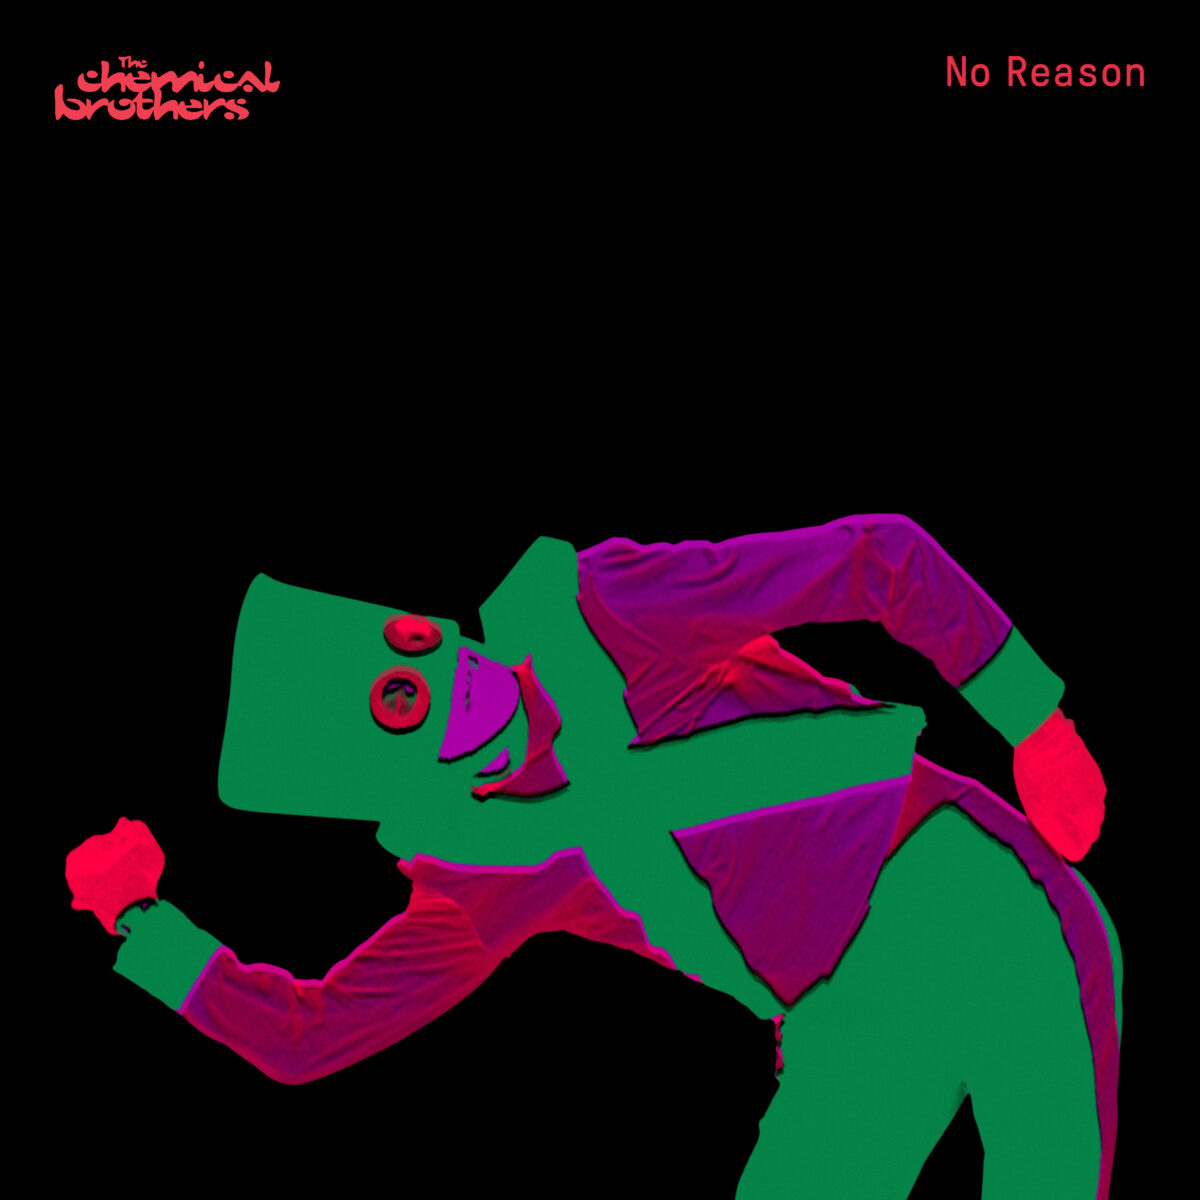 The Chemical Brothers estrena «No Reason»